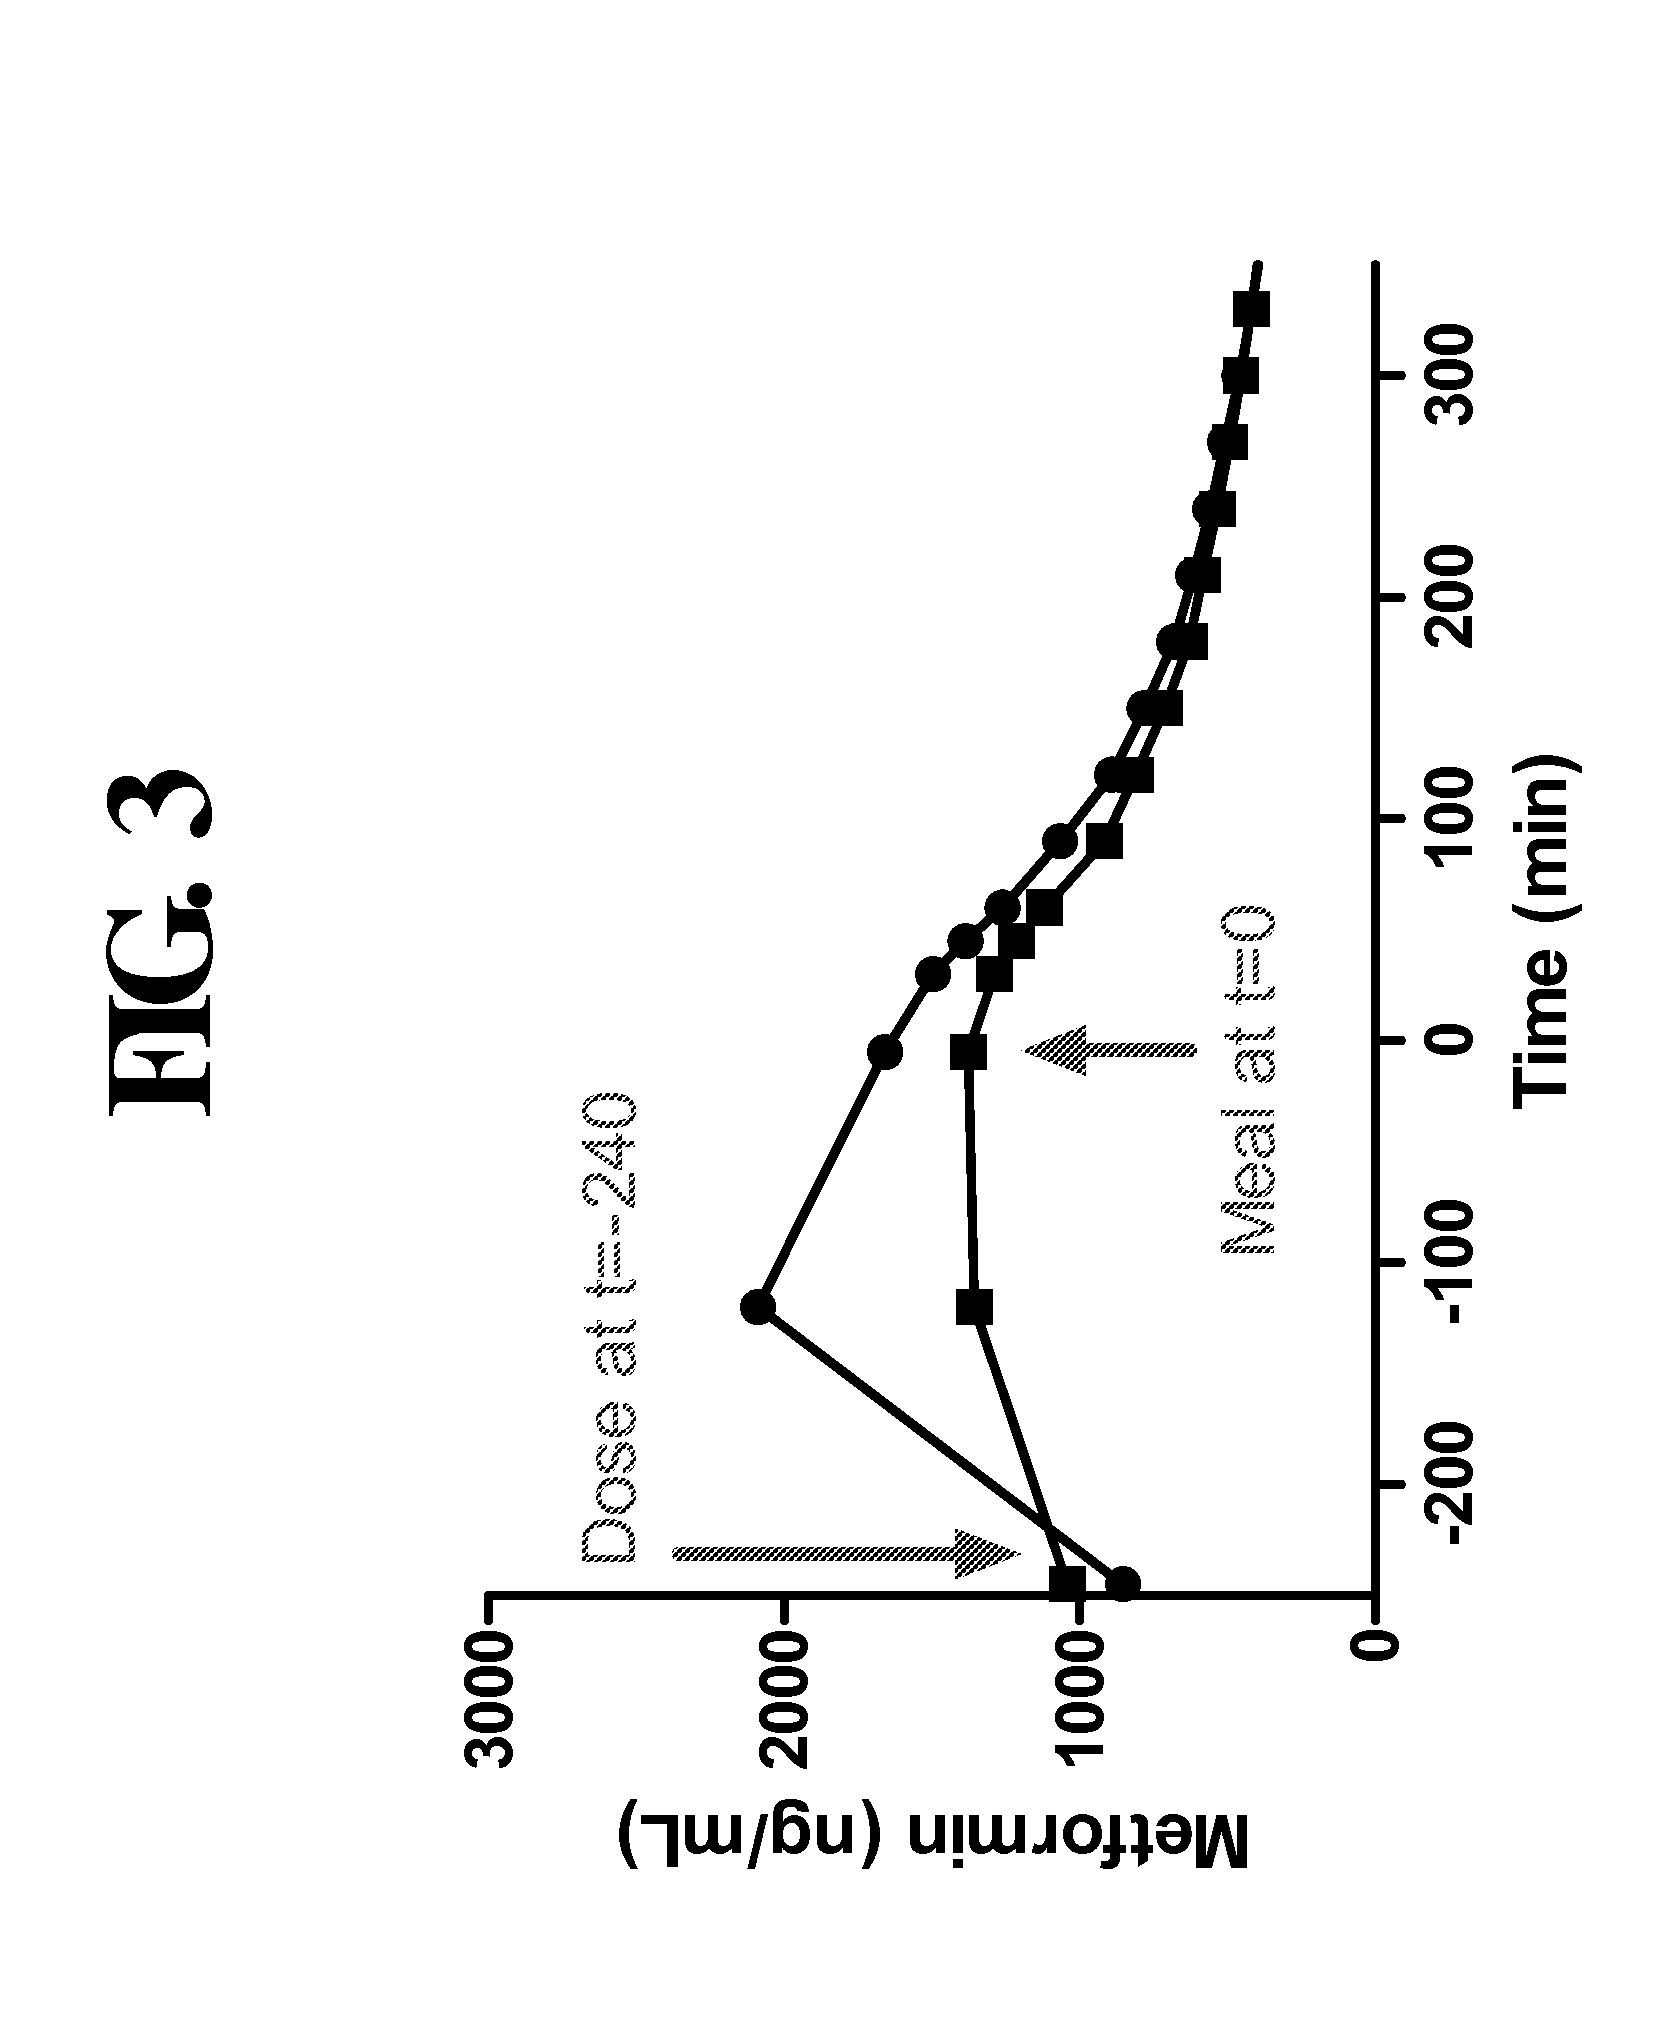 Compositions and Methods for Treating Metabolic Disorders